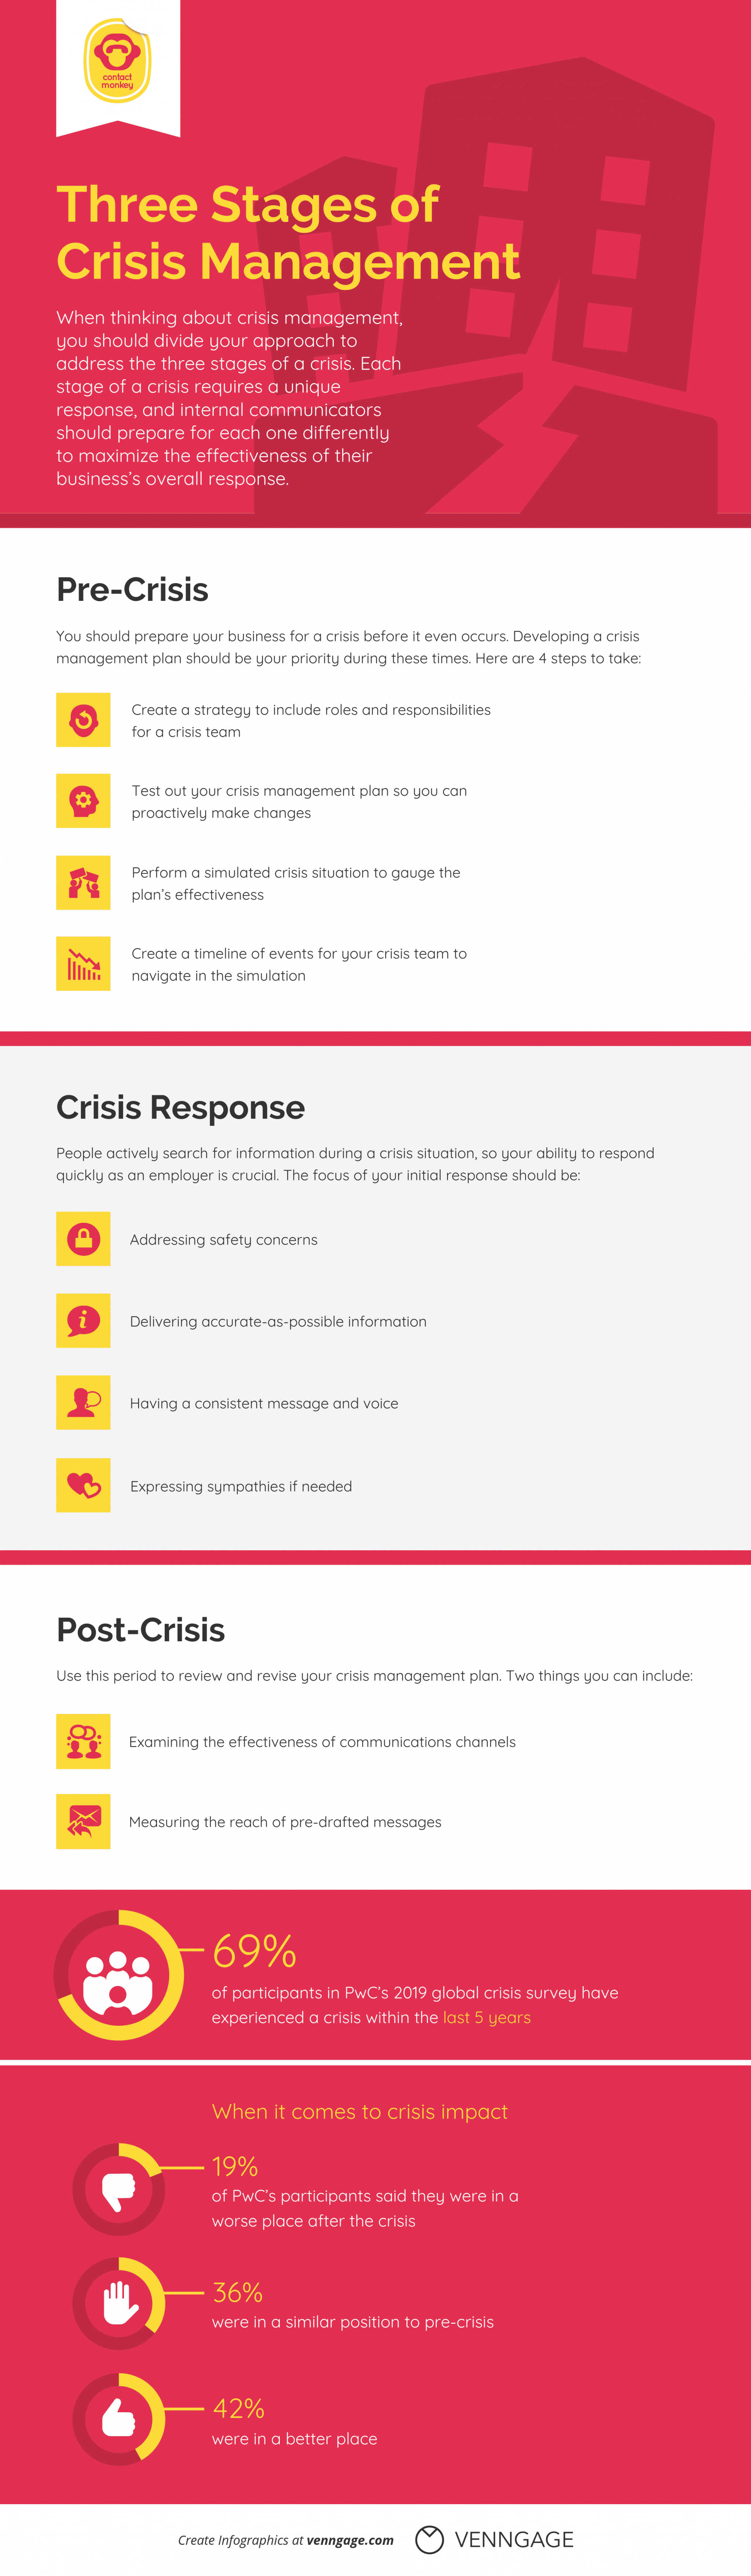 Screenshot of crisis management process used for creating a crisis communication plan.